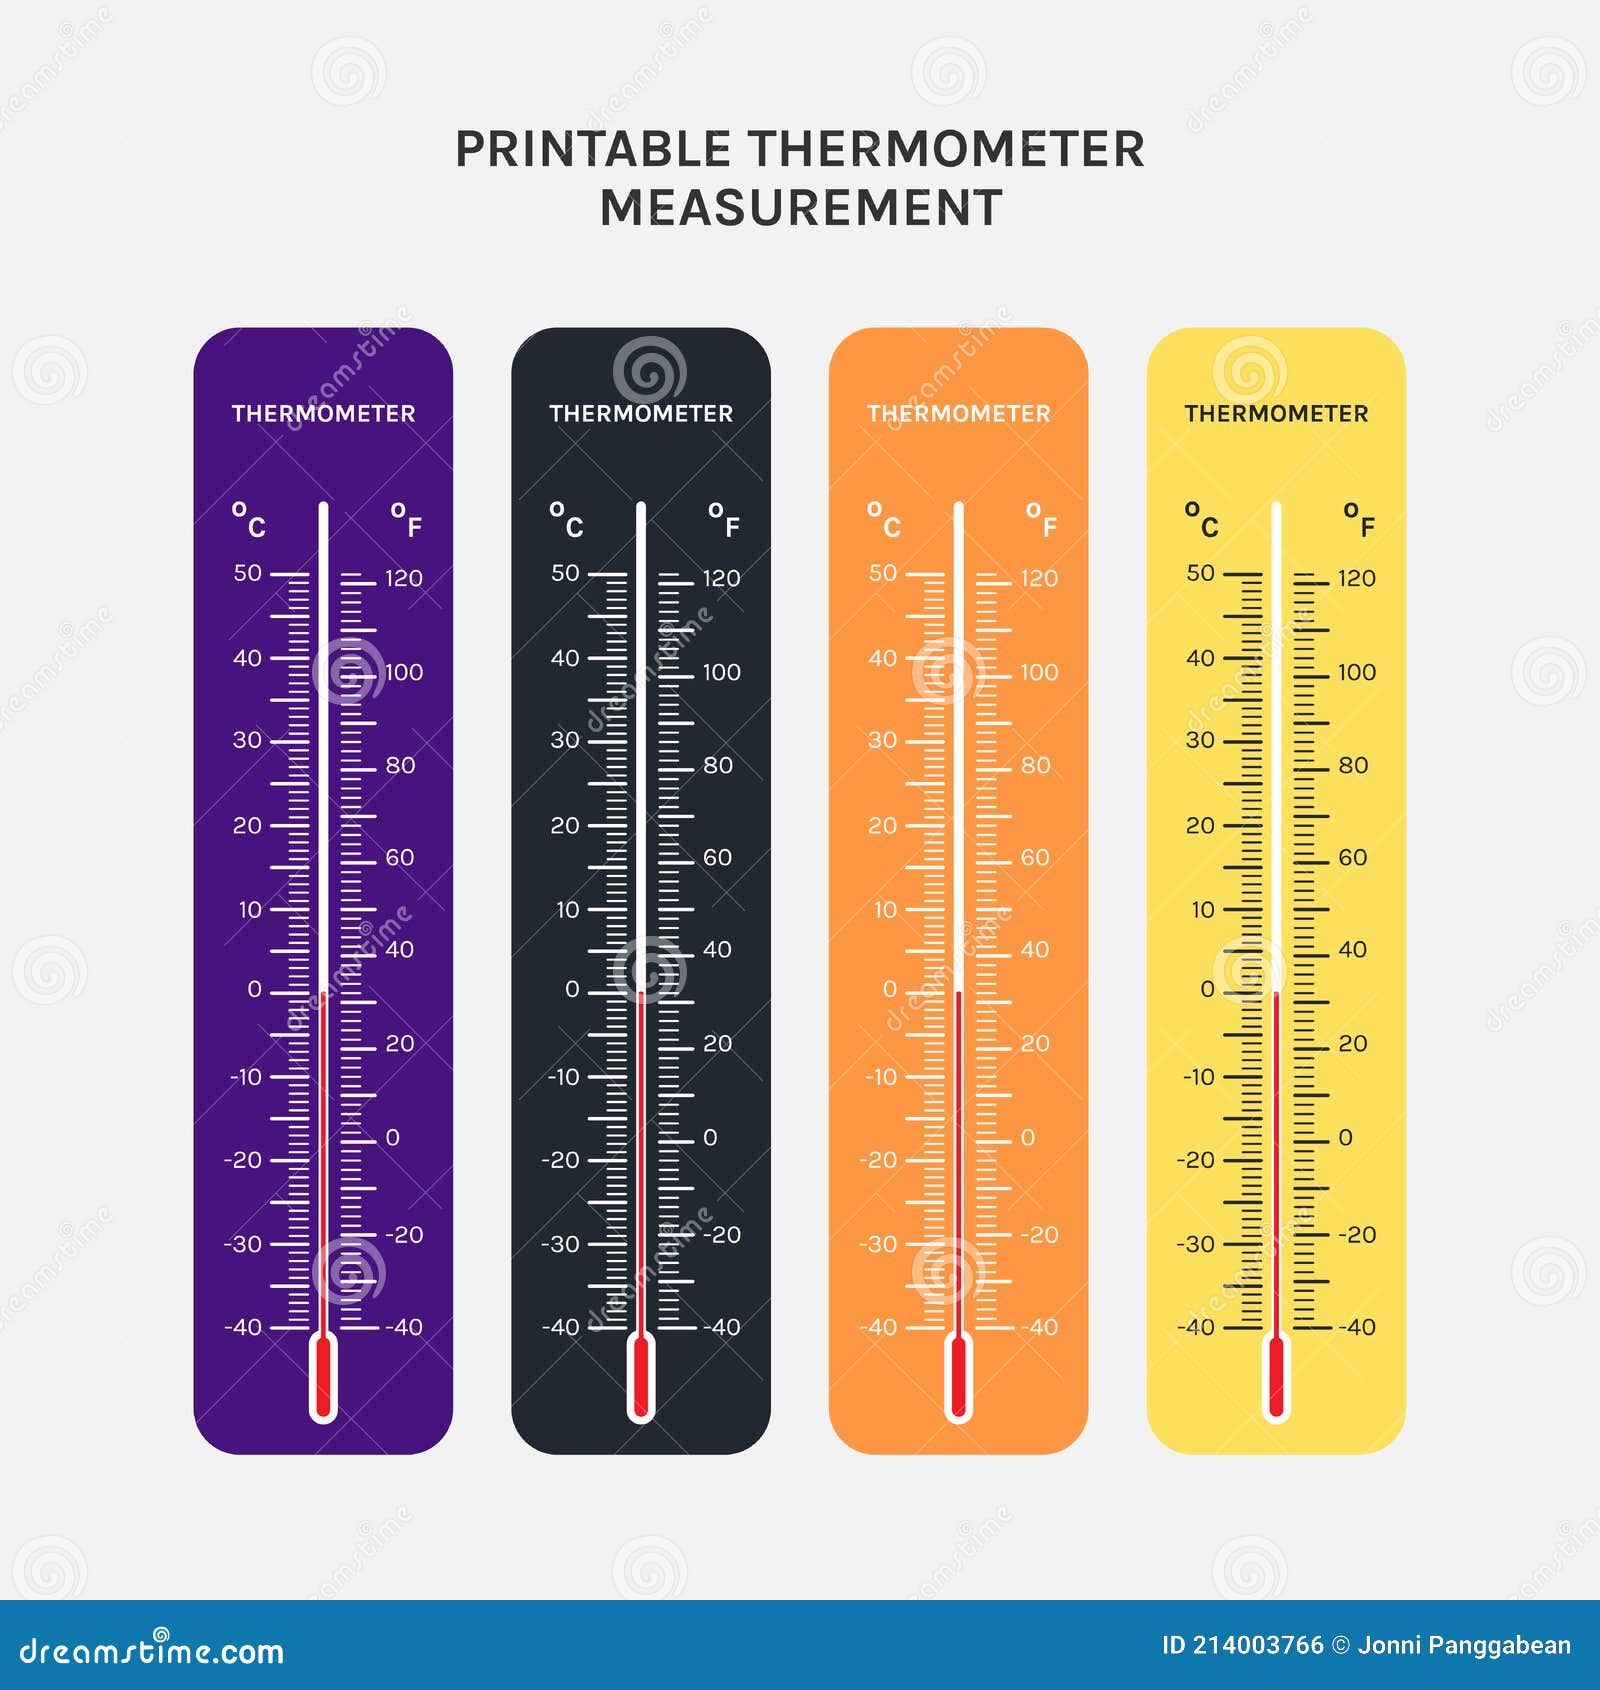 Printable Of Thermometer Use For Measurement Of Air Temperature Throughout Reading A Thermometer Worksheet